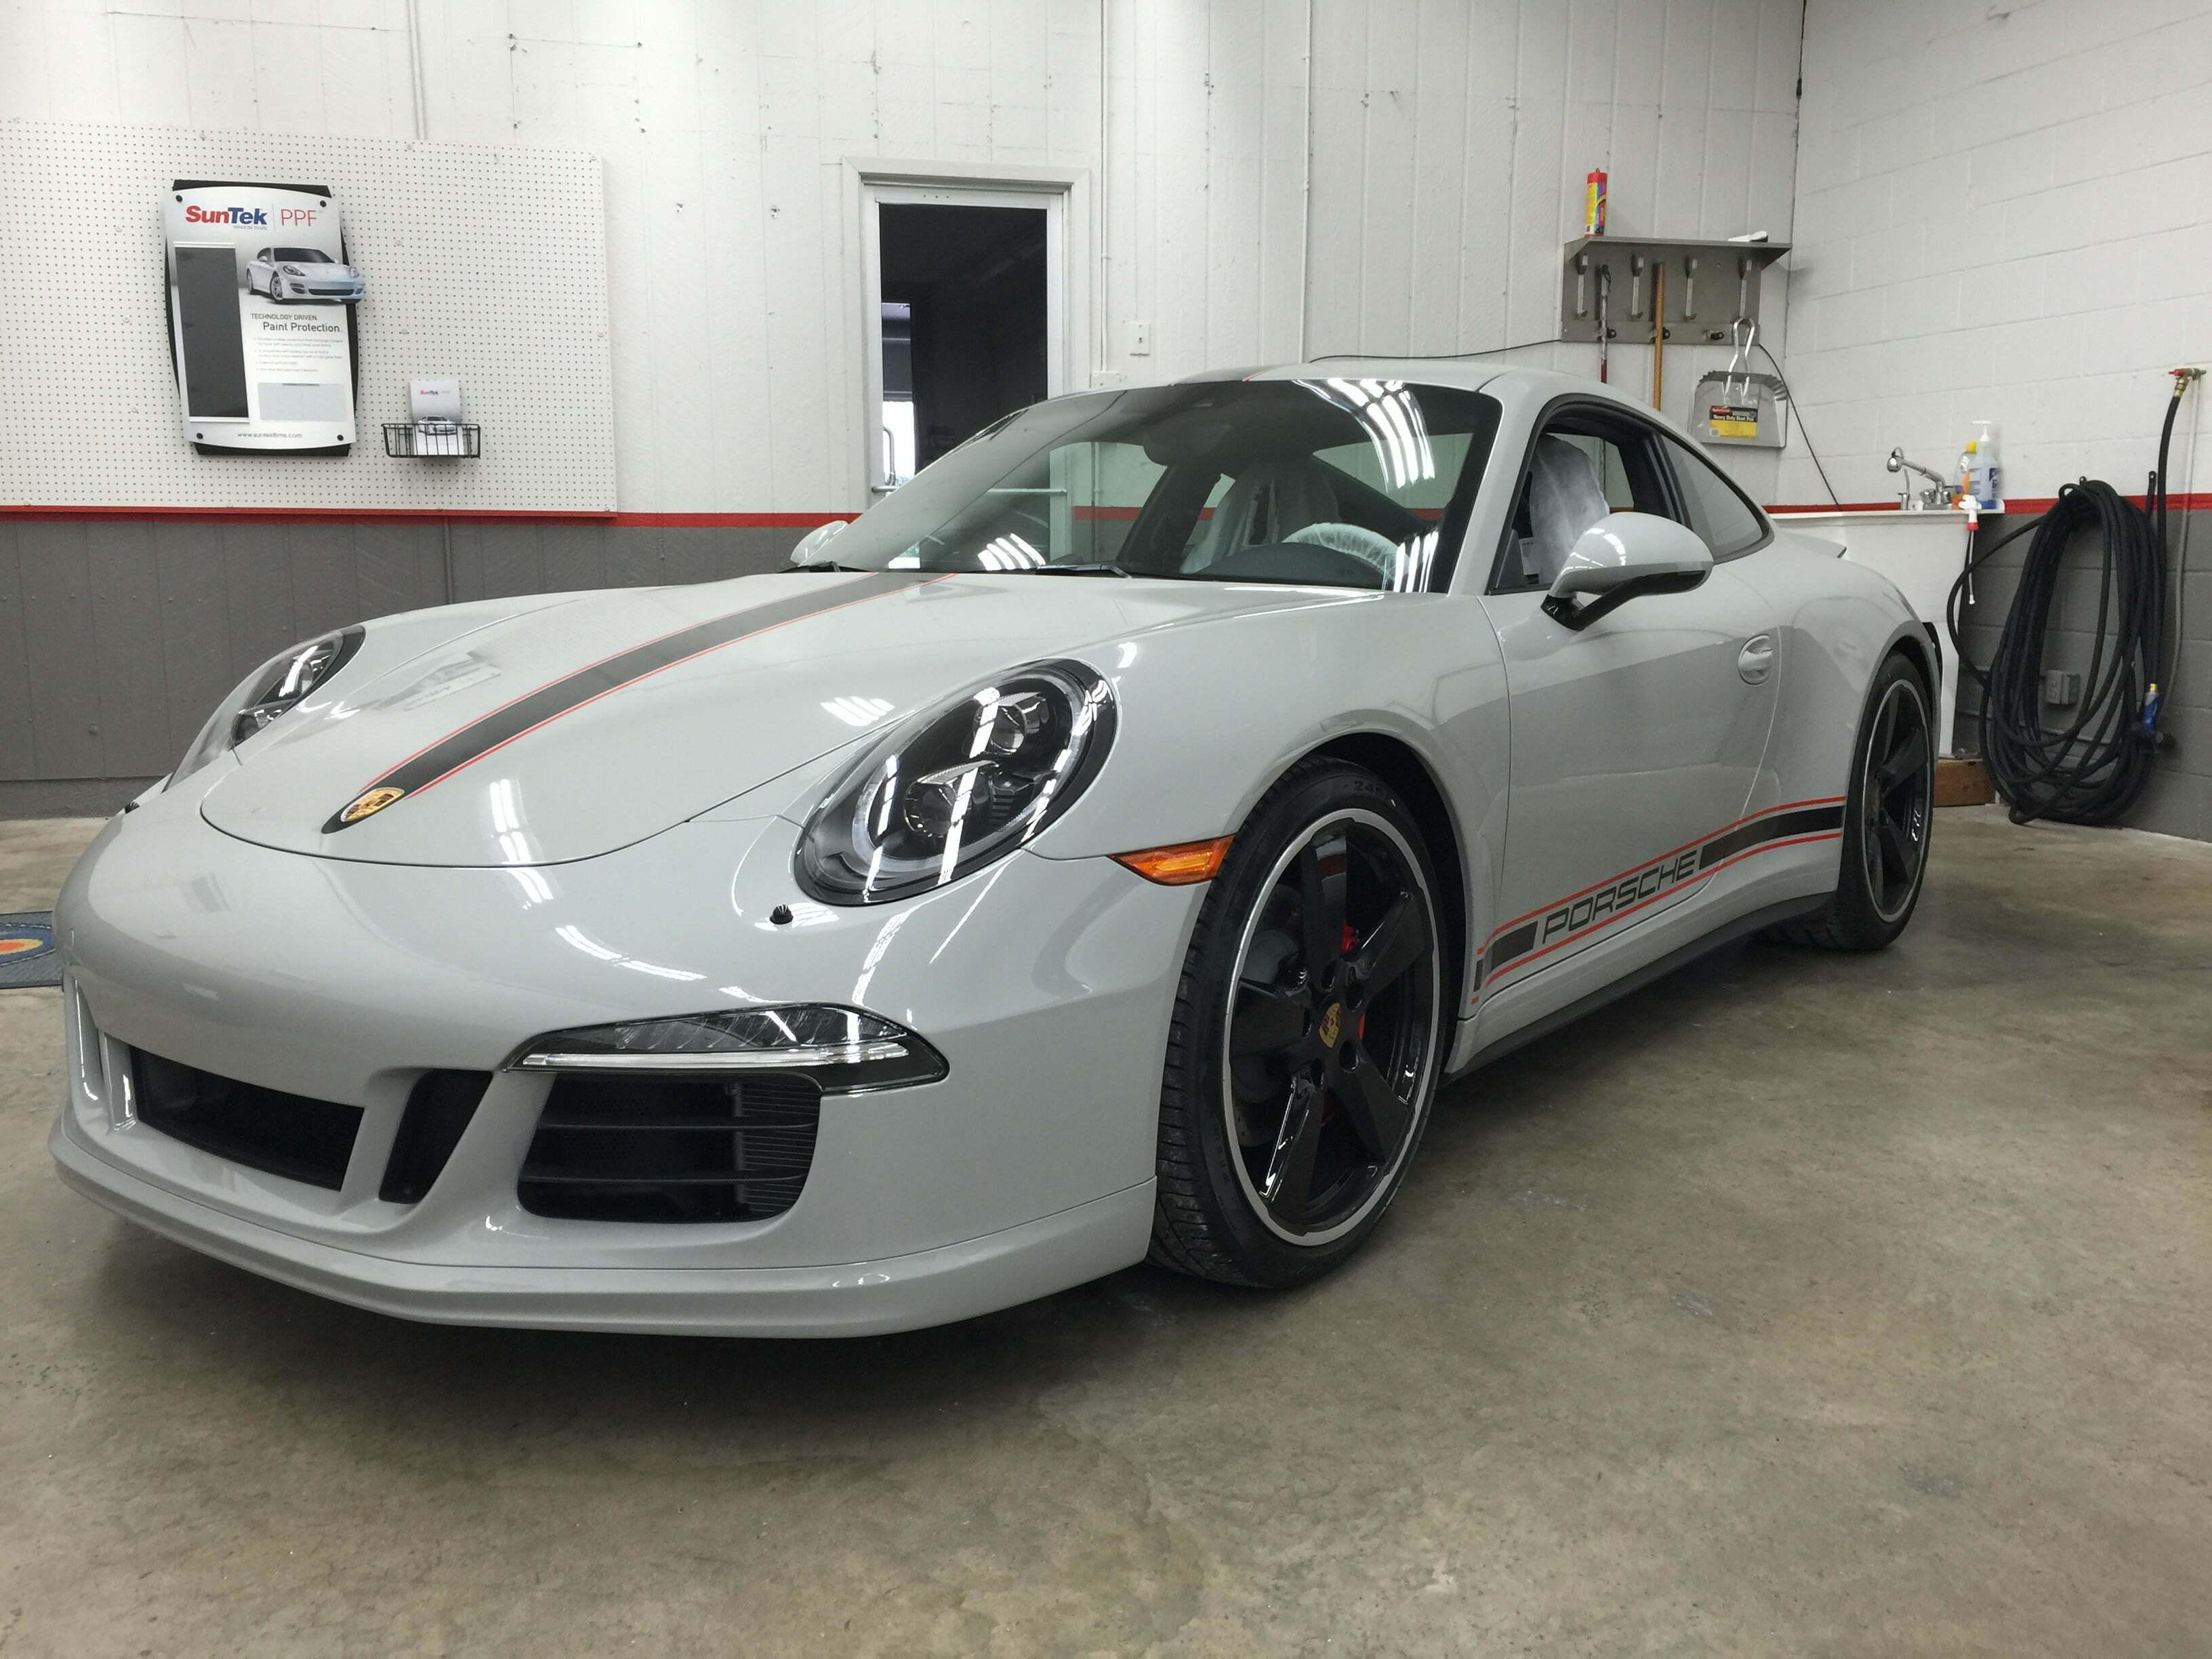 Porsche with Paint Protection applied